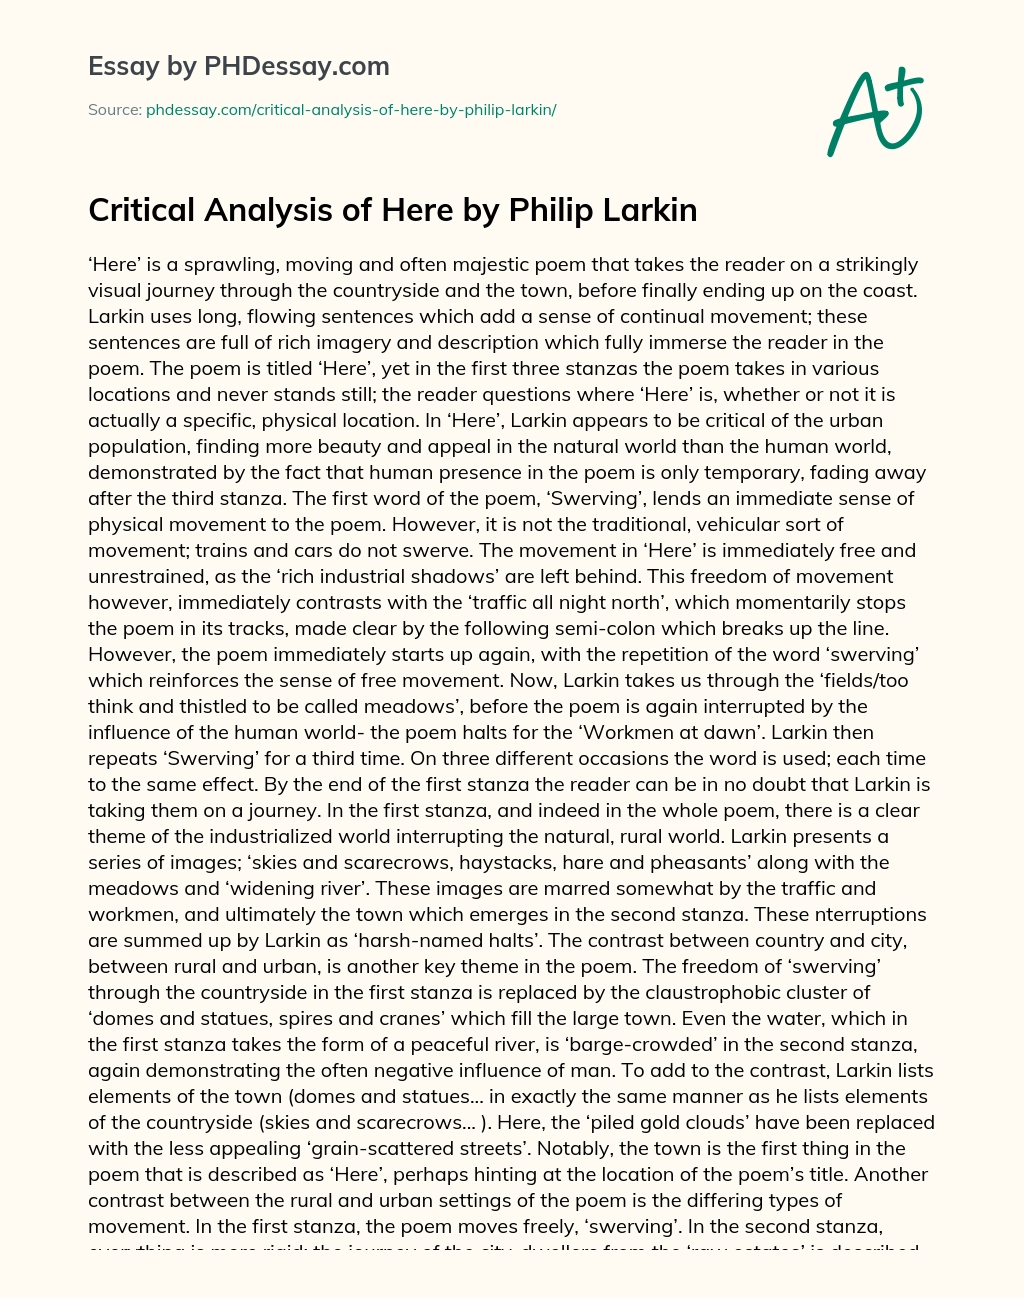 Critical Analysis of Here by Philip Larkin essay